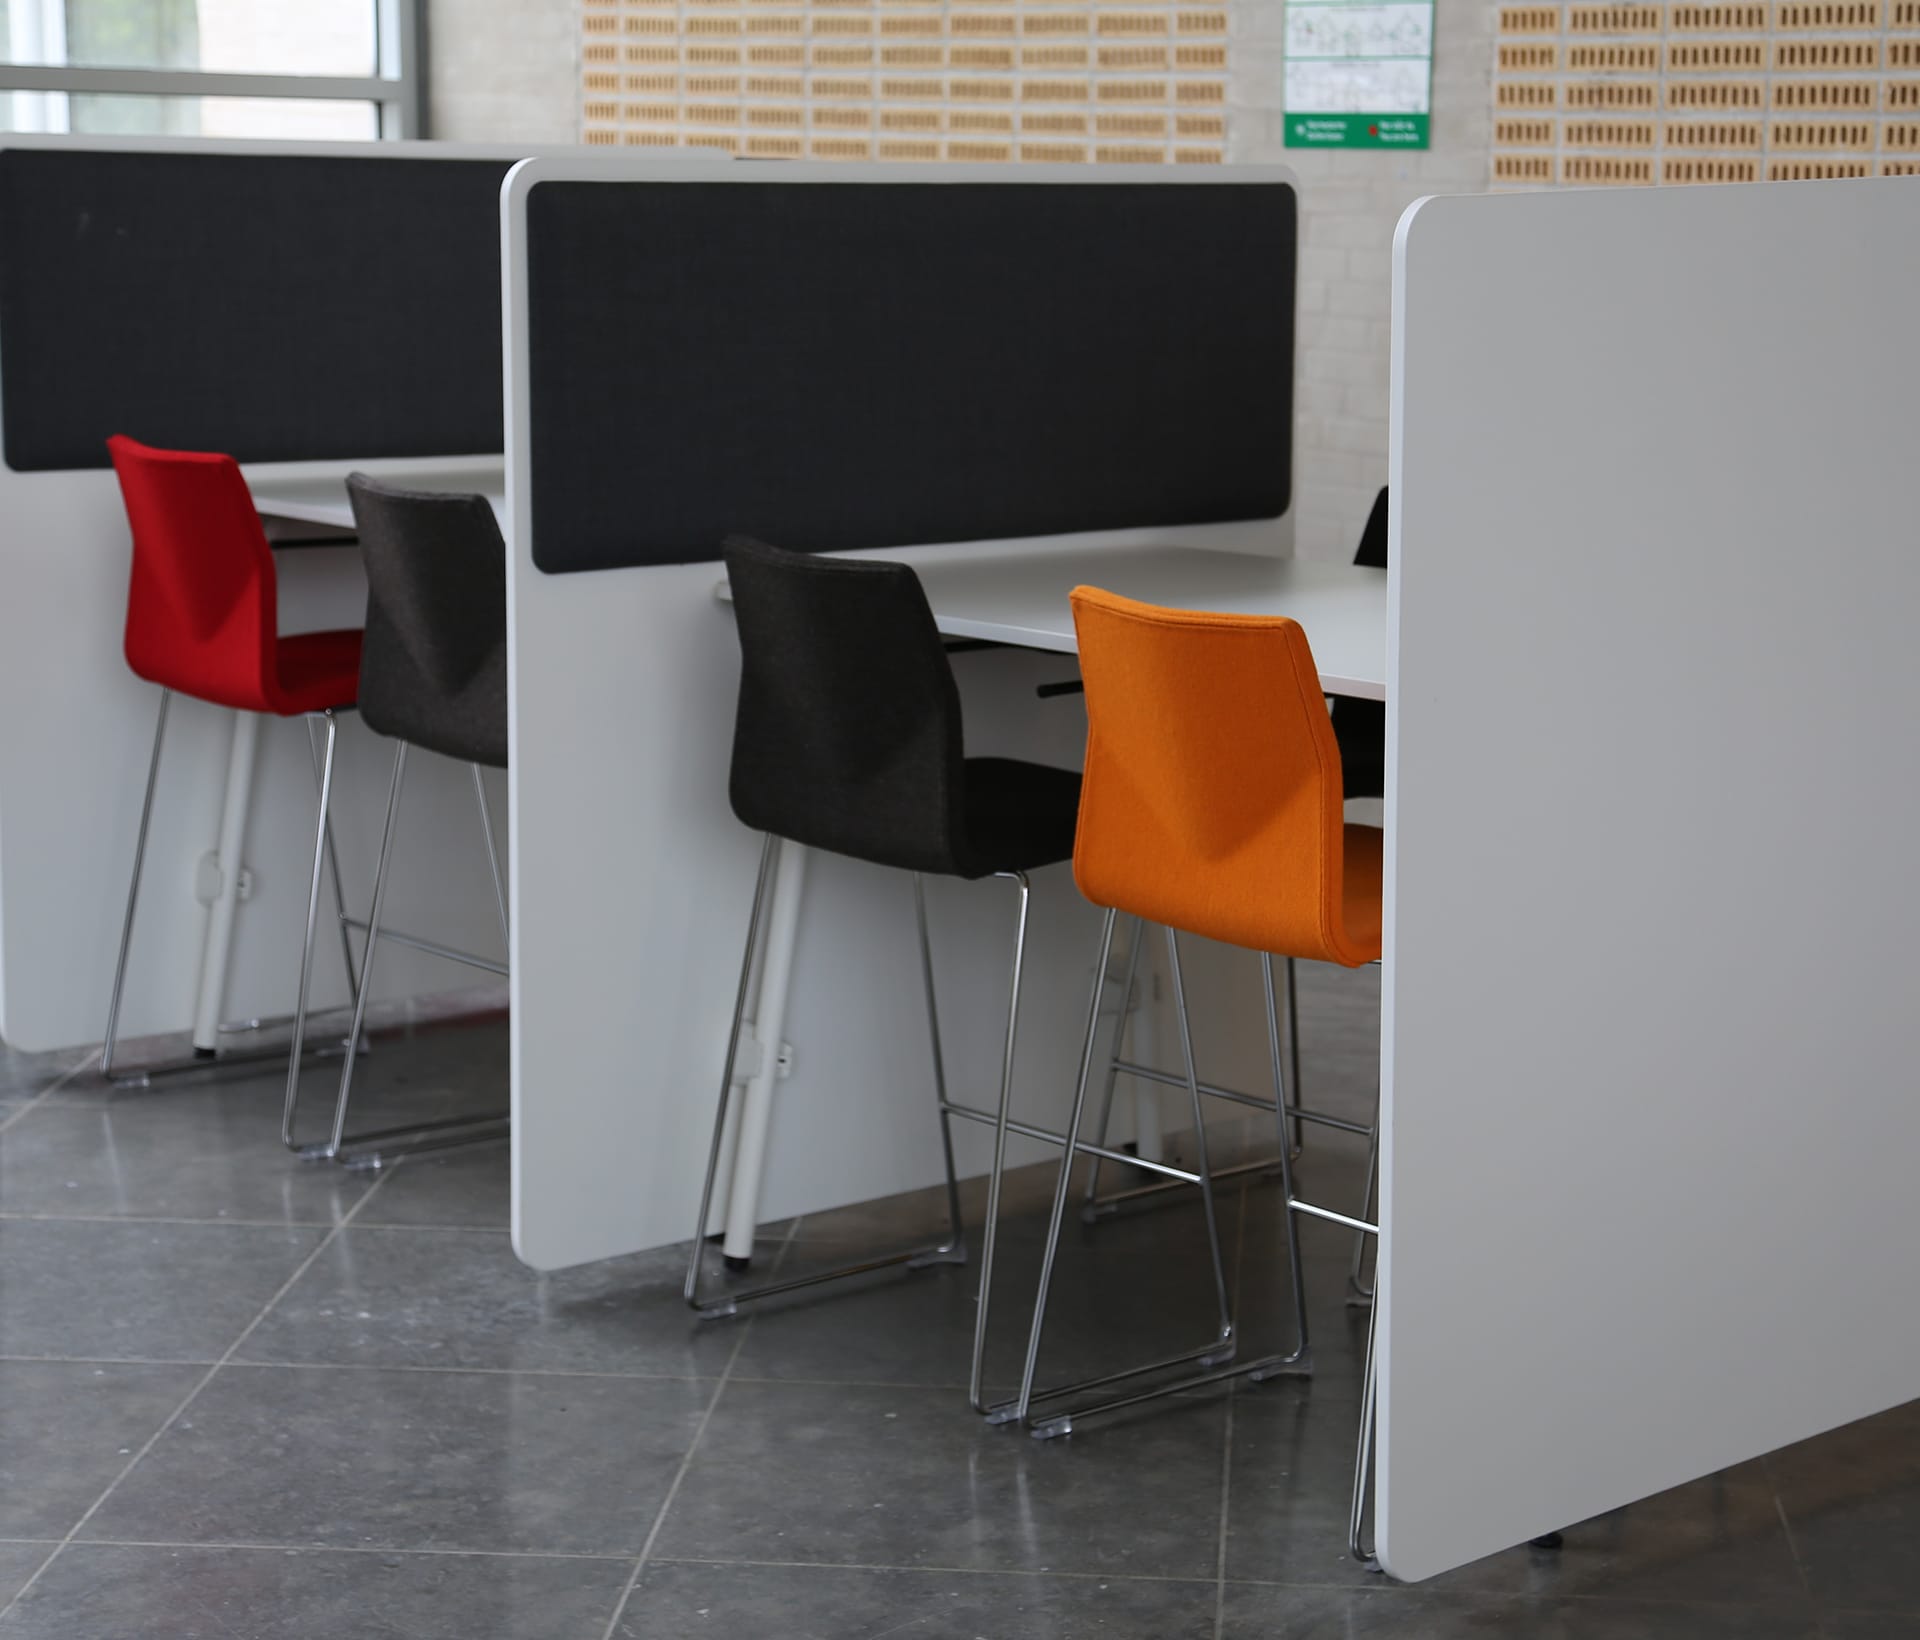 A group of chairs placed against some study booths